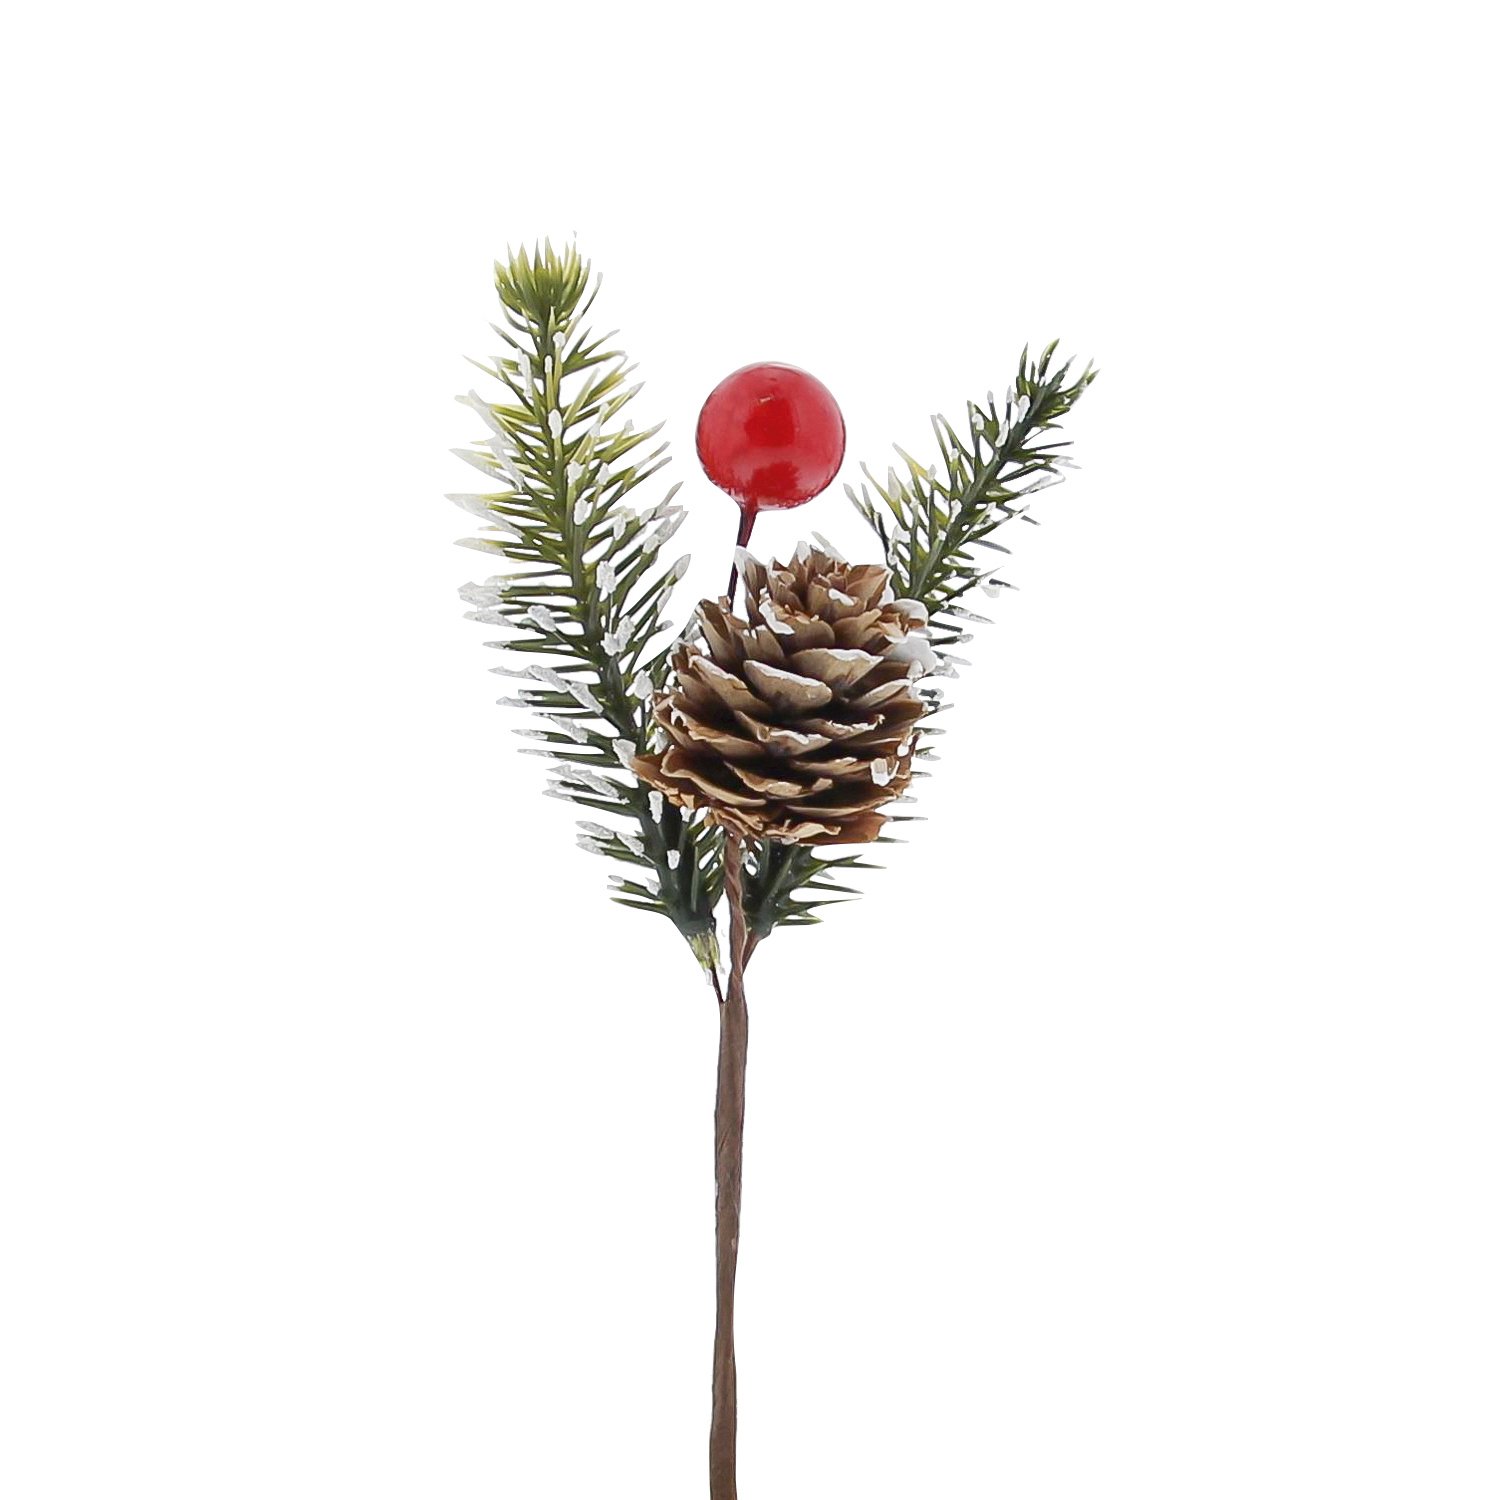 2 snowy pine branches with cone and red berry 125 x 50 x 44mm - 96xpcs